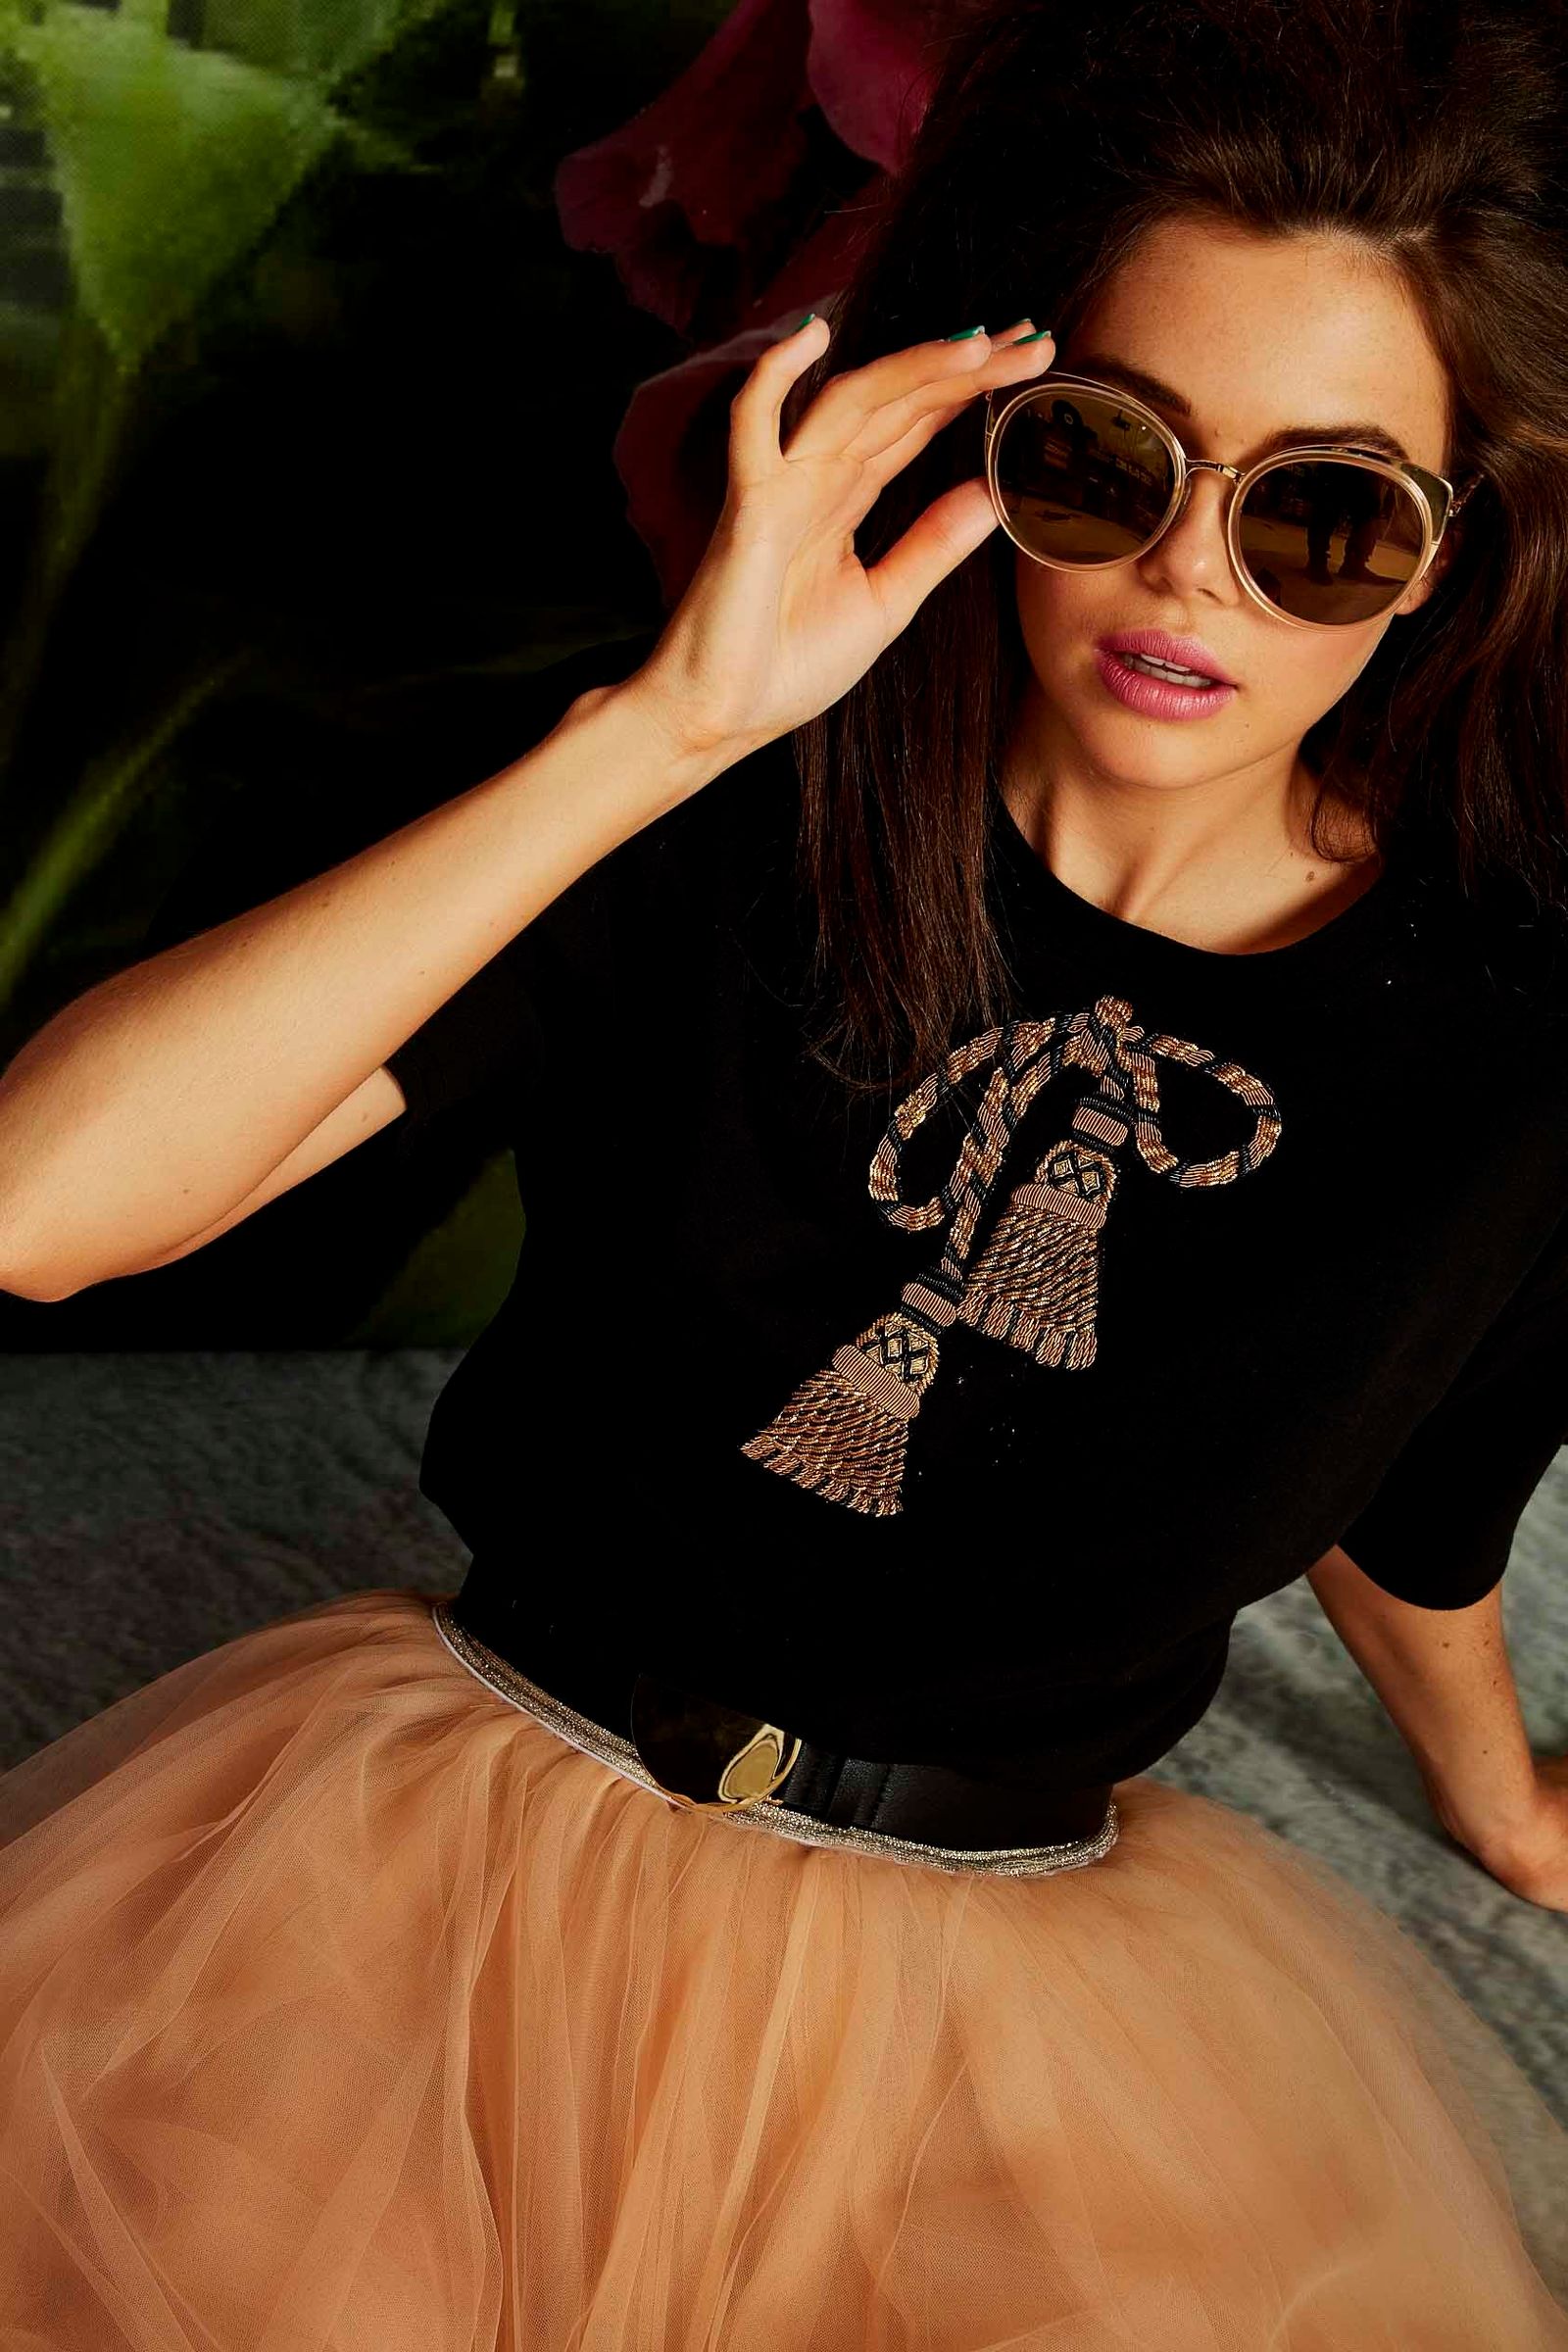 BEAU-TIE T-SHIRT
								, 			YOURS TULLEY SKIRT
								, 			FULL MOON BELT
								, 			MIXED METAL SUNGLASSES